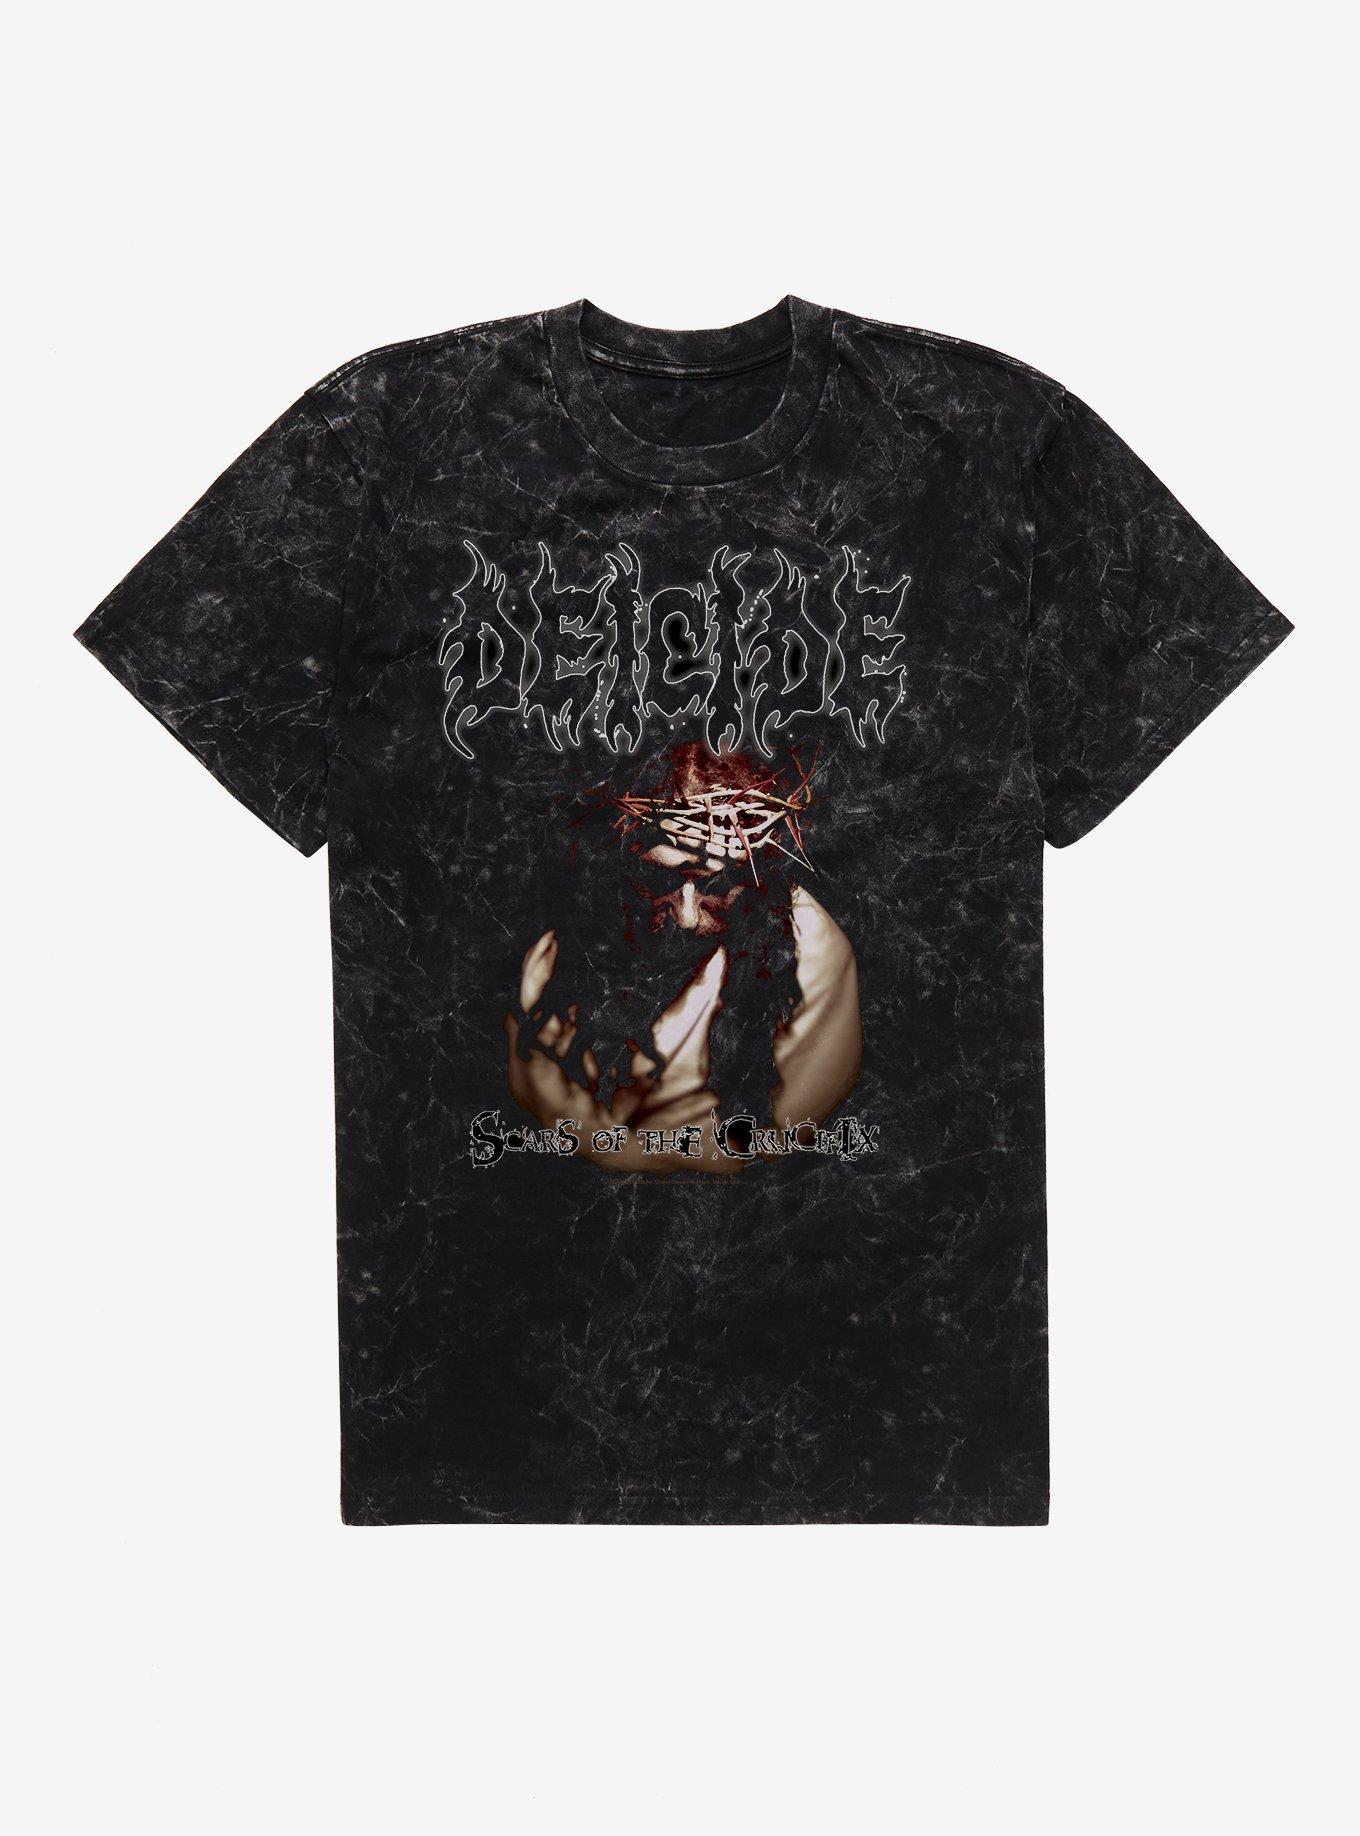 Deicide Scars Of The Crucifix Mineral Wash T-Shirt, BLACK MINERAL WASH, hi-res